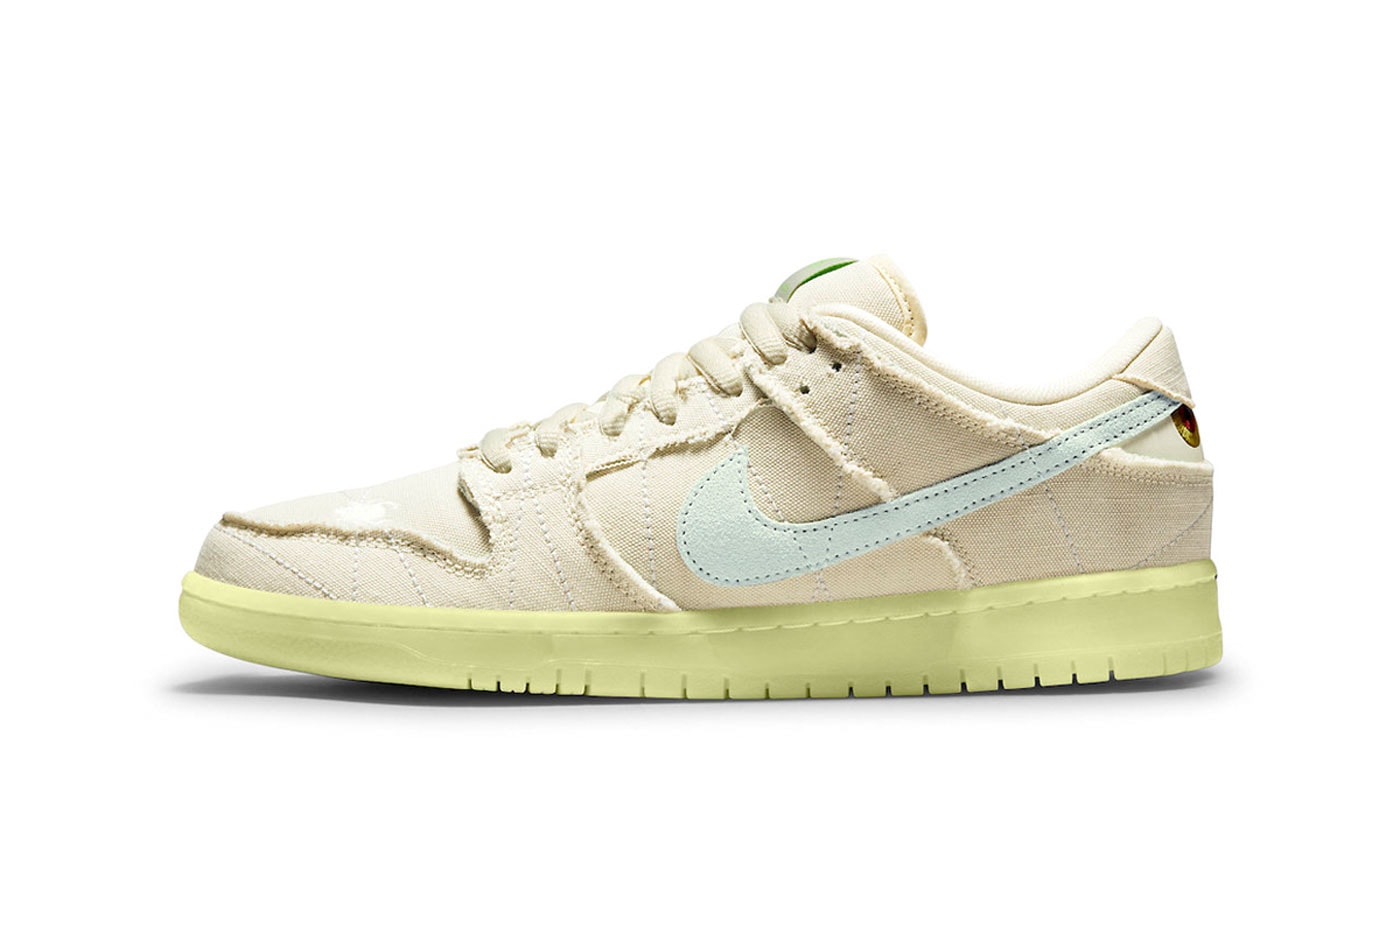 Nike SB Dunk Low "Mummy" Official Images DM0774-111 Release 2021 Halloween October